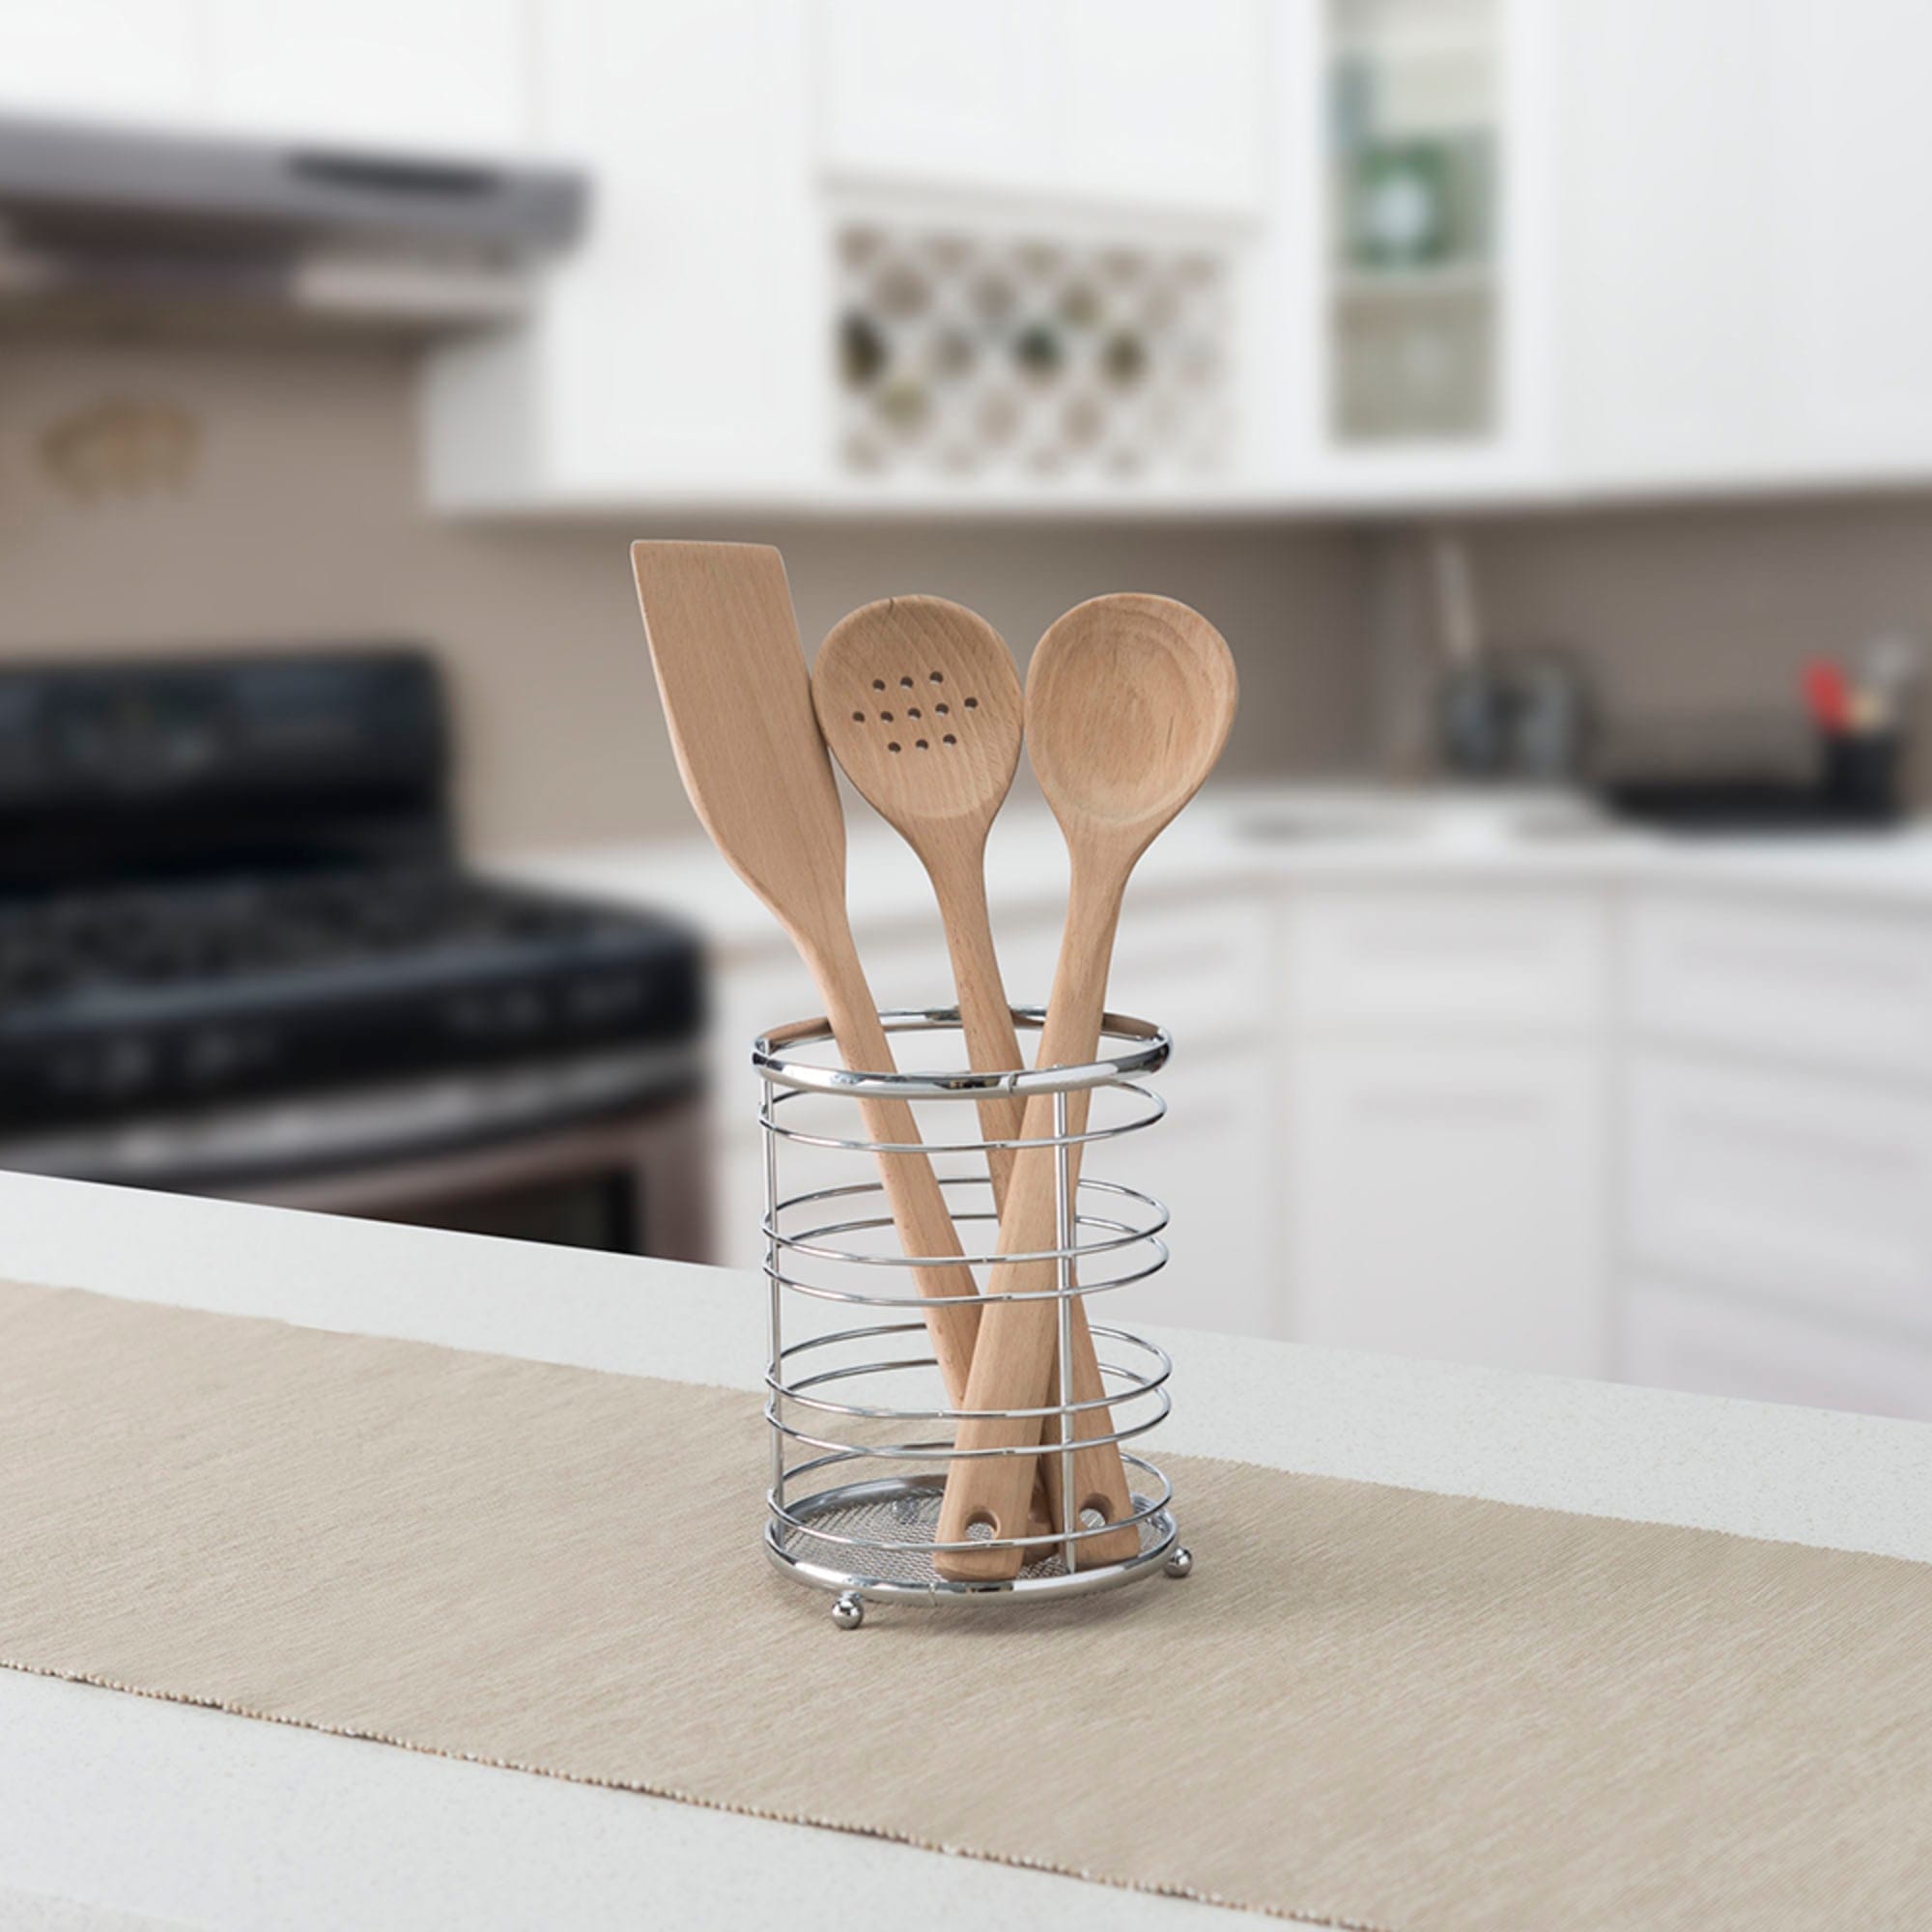 Home Basics Chrome Plated Steel Cutlery Holder $4.00 EACH, CASE PACK OF 24